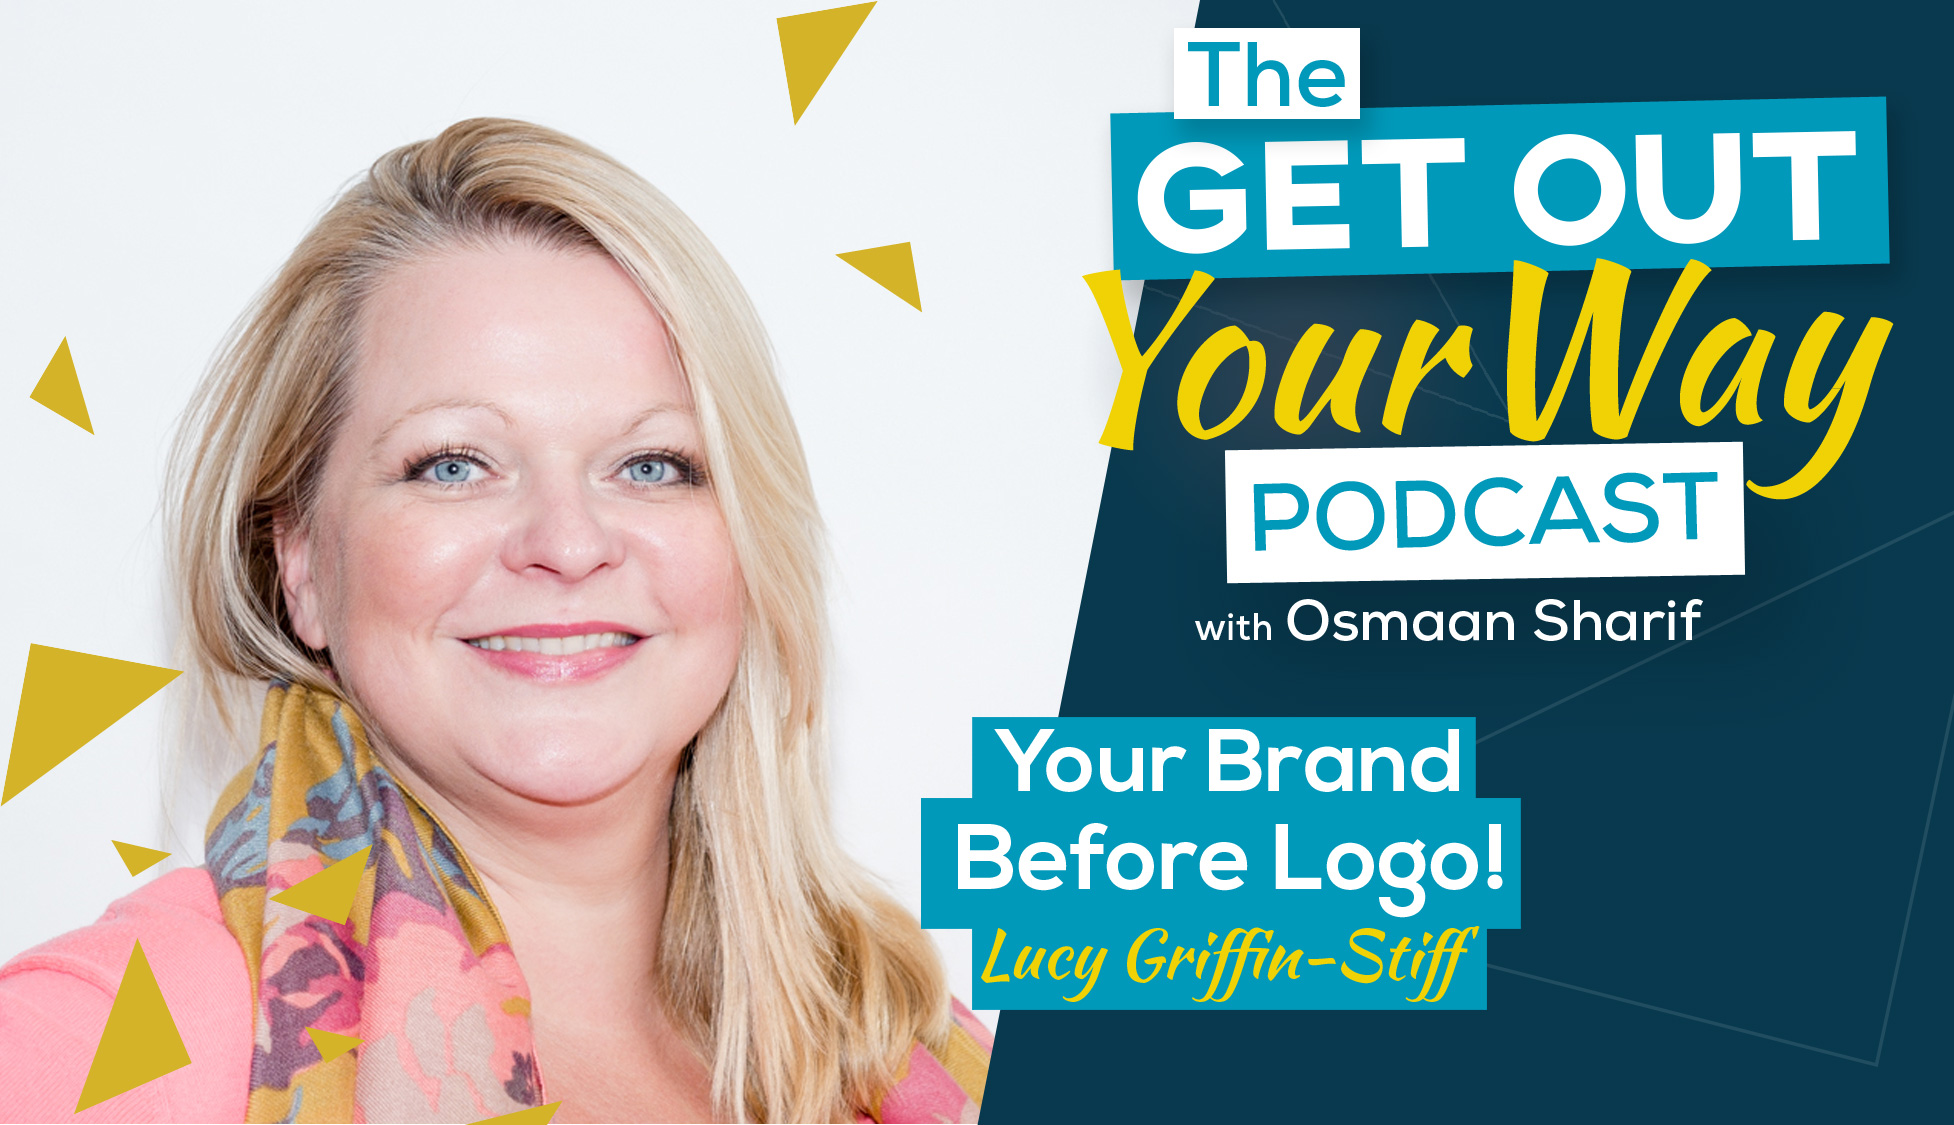 Your Brand Before Logo!